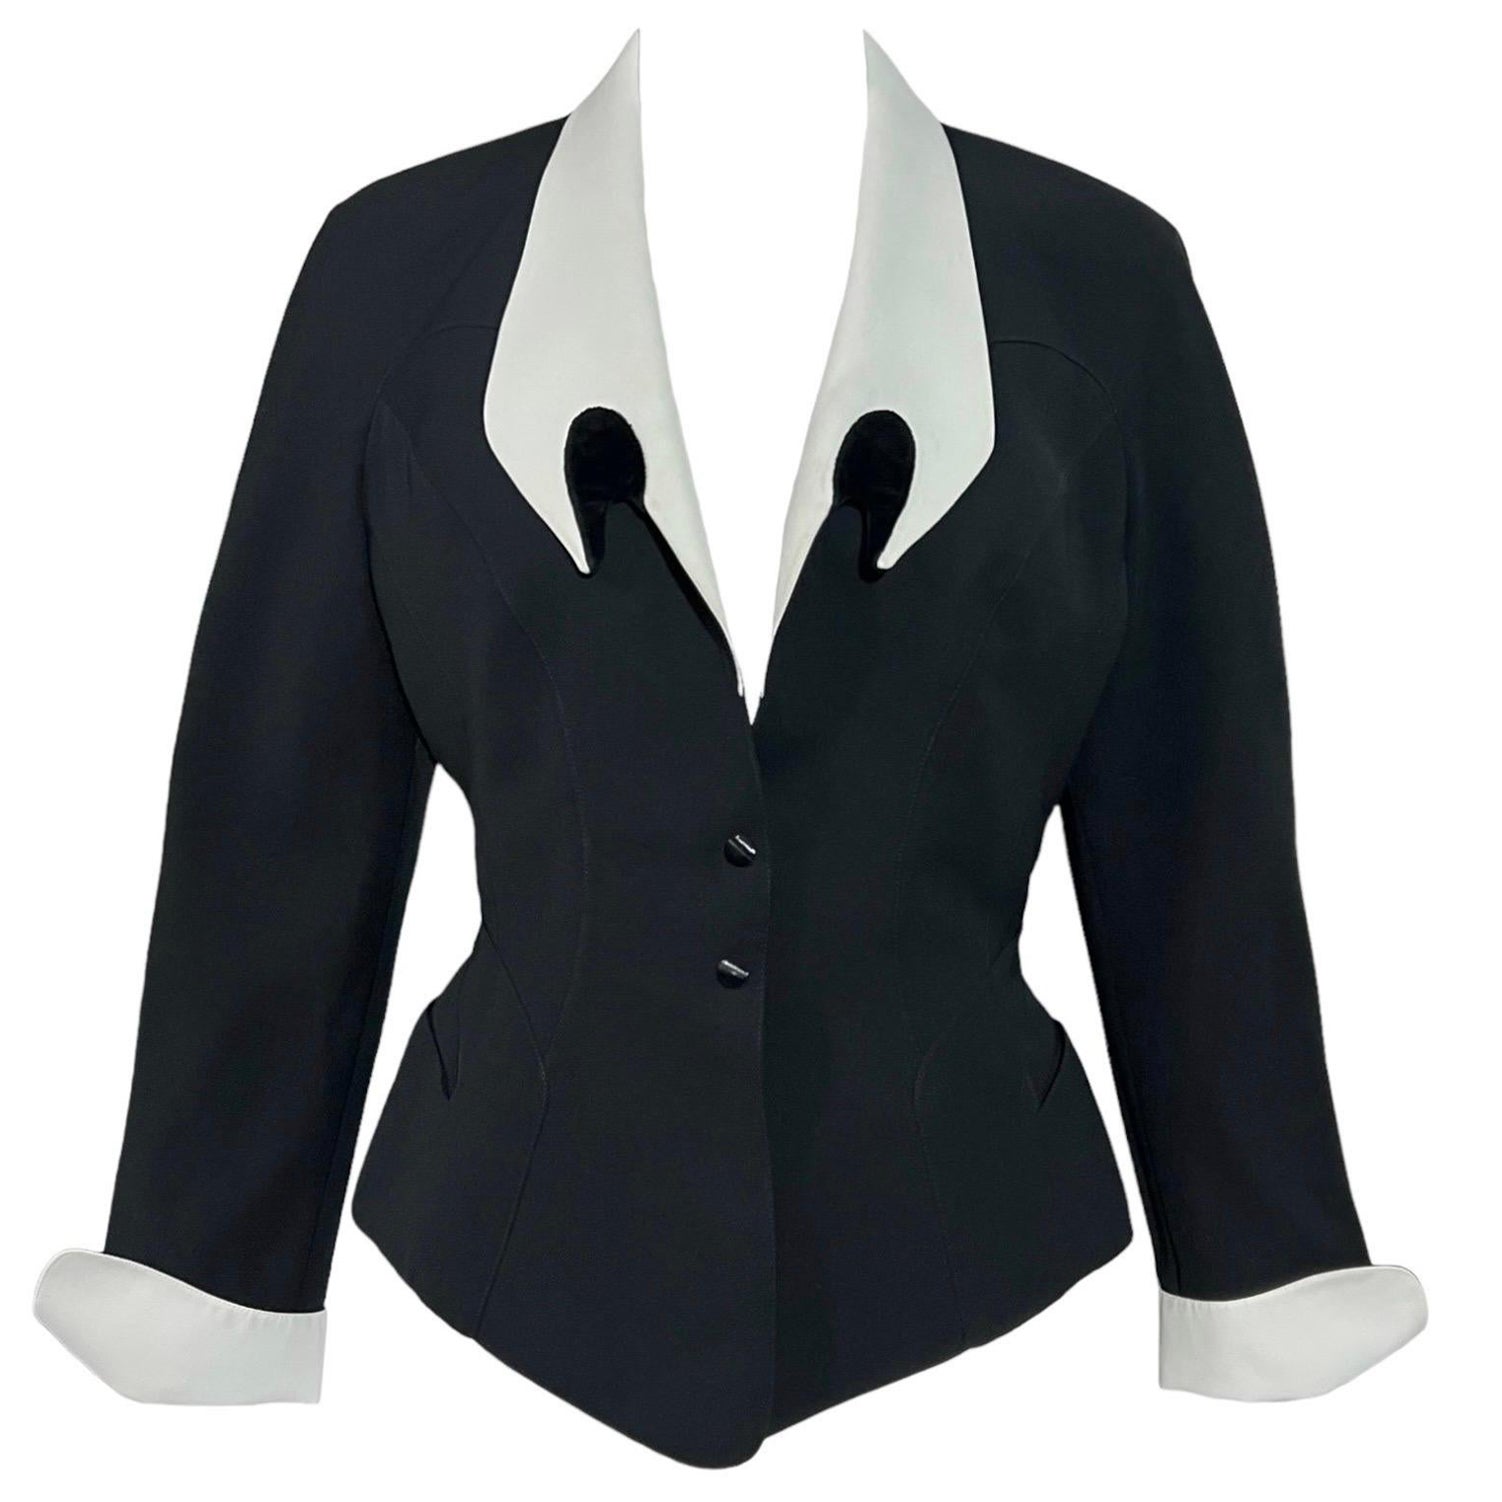 S/S 1992 Thierry Mugler Black Runway Jacket Dramatic White Collar For Sale